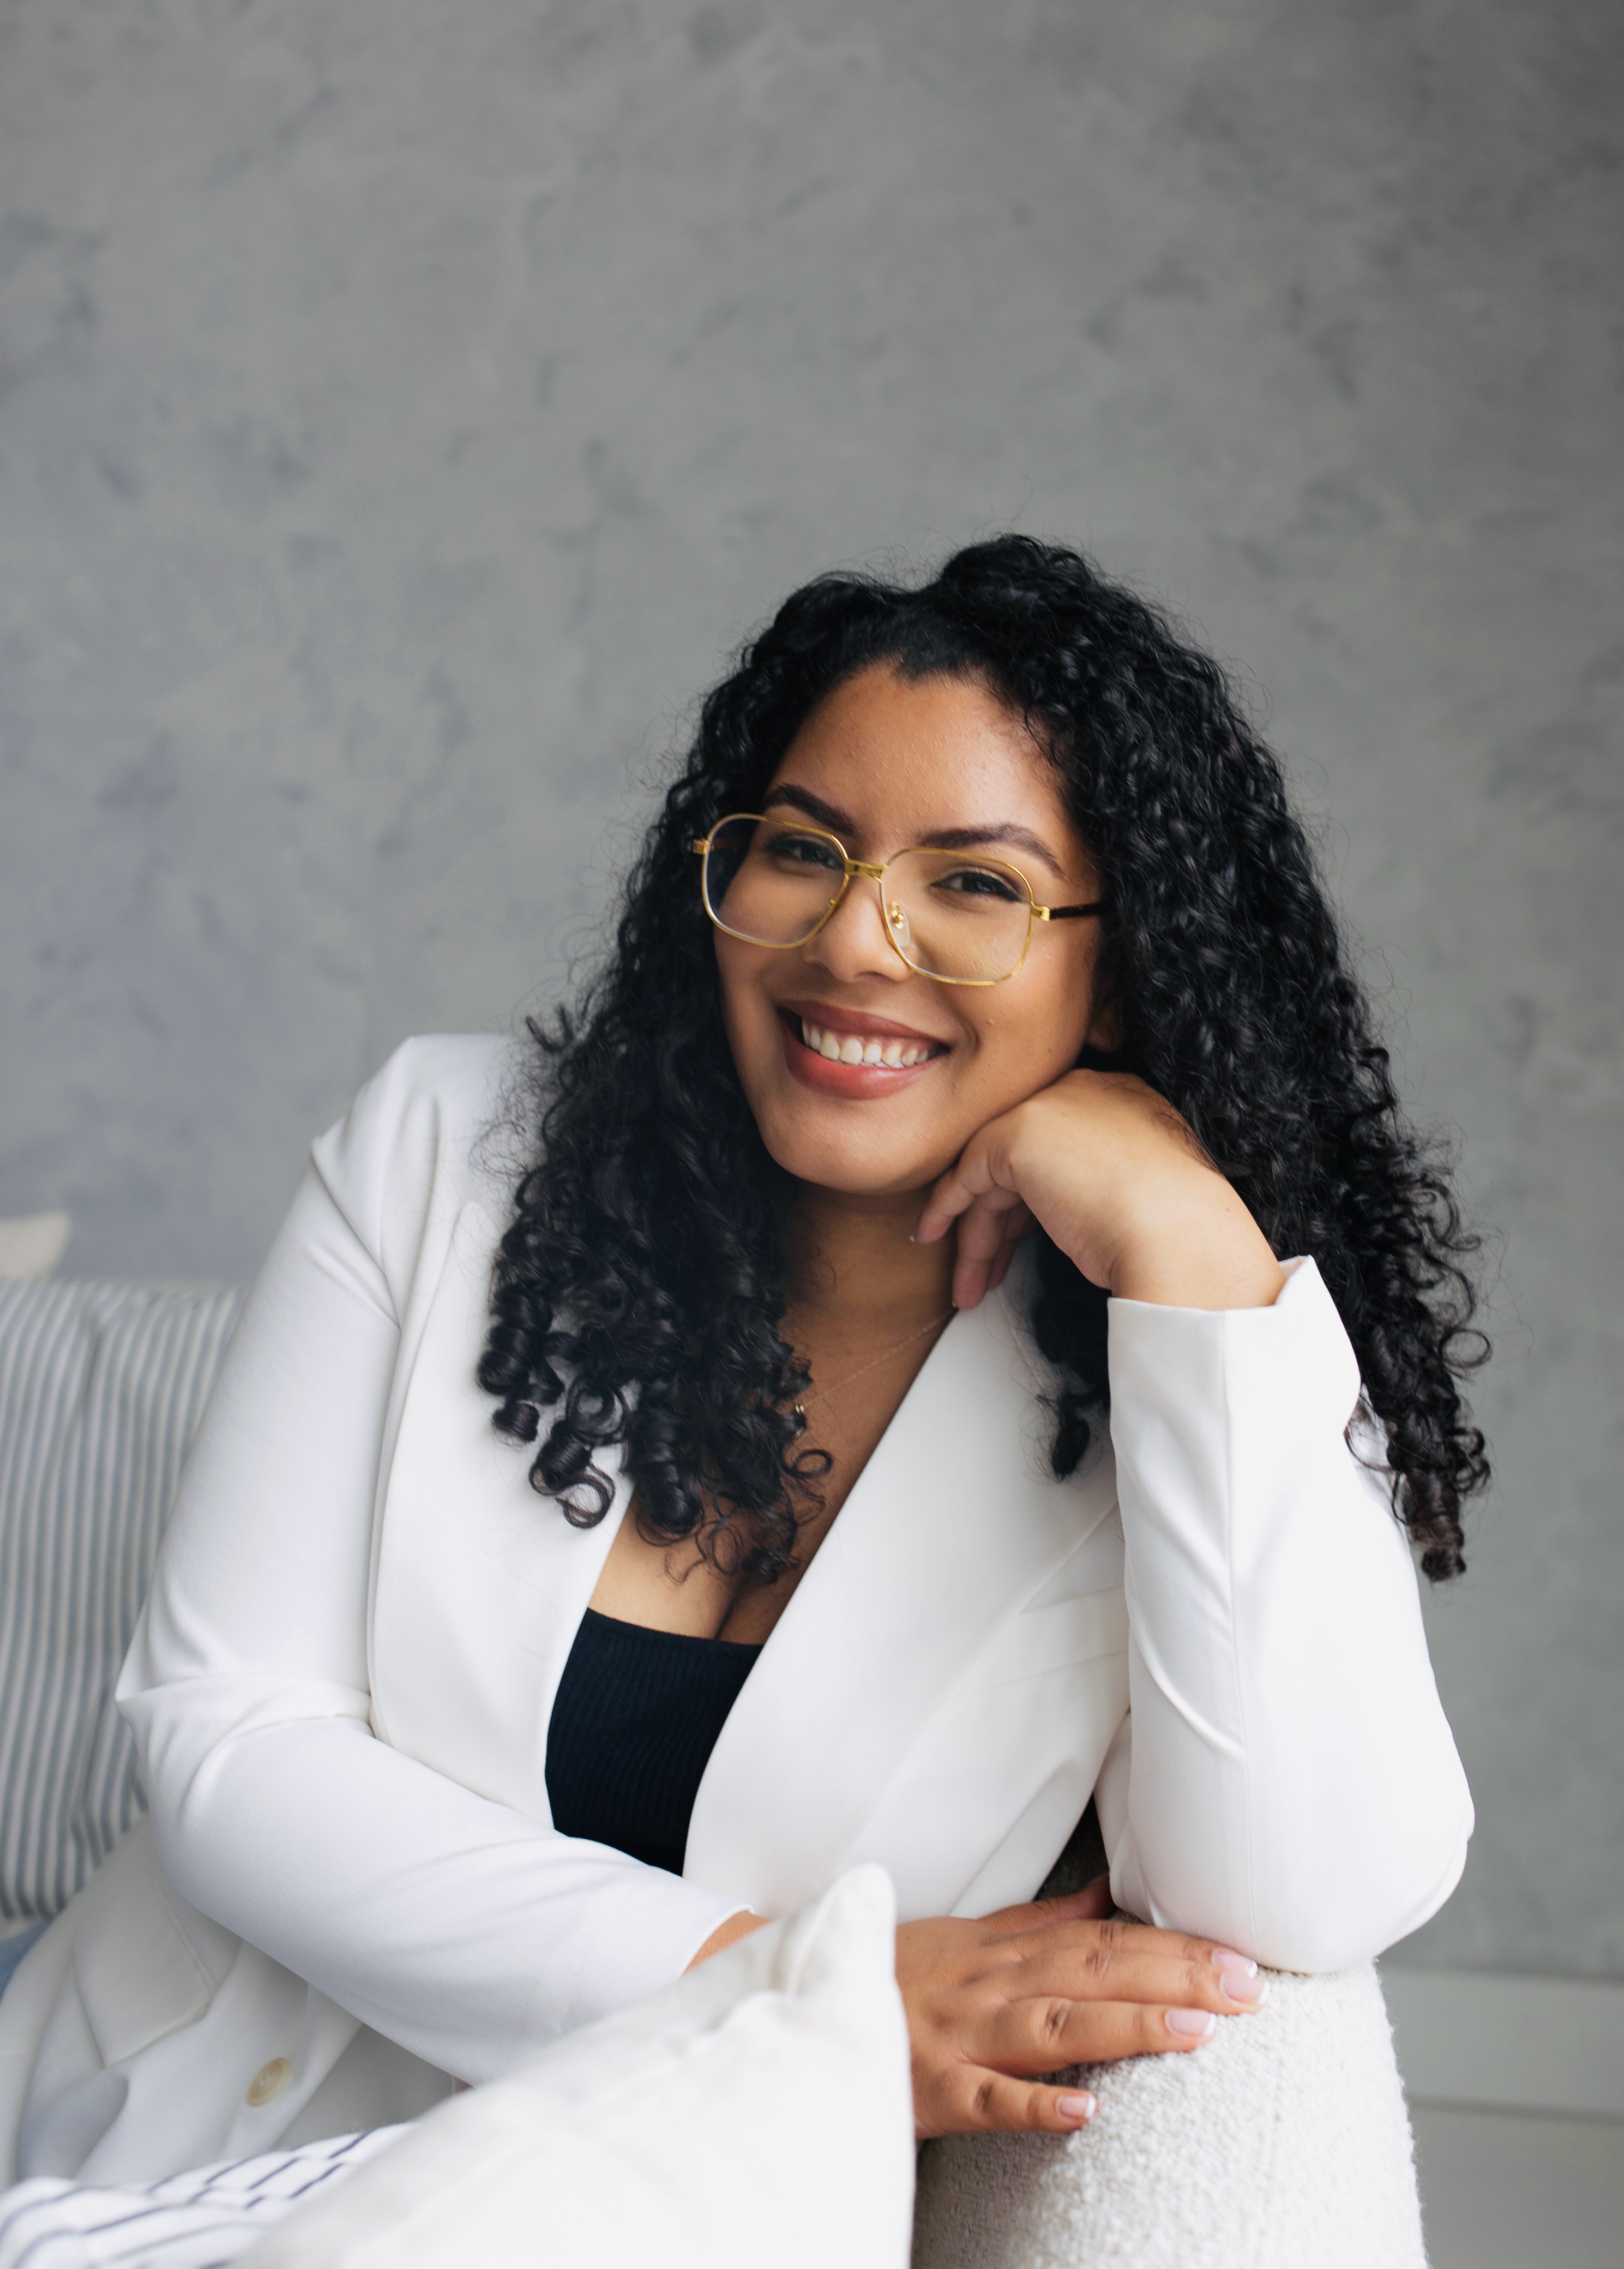 Cheyenne is a black woman with black curly hair and glasses. She is sitting on a white couch, wearing a white suit and black shirt while smiling at the camera.